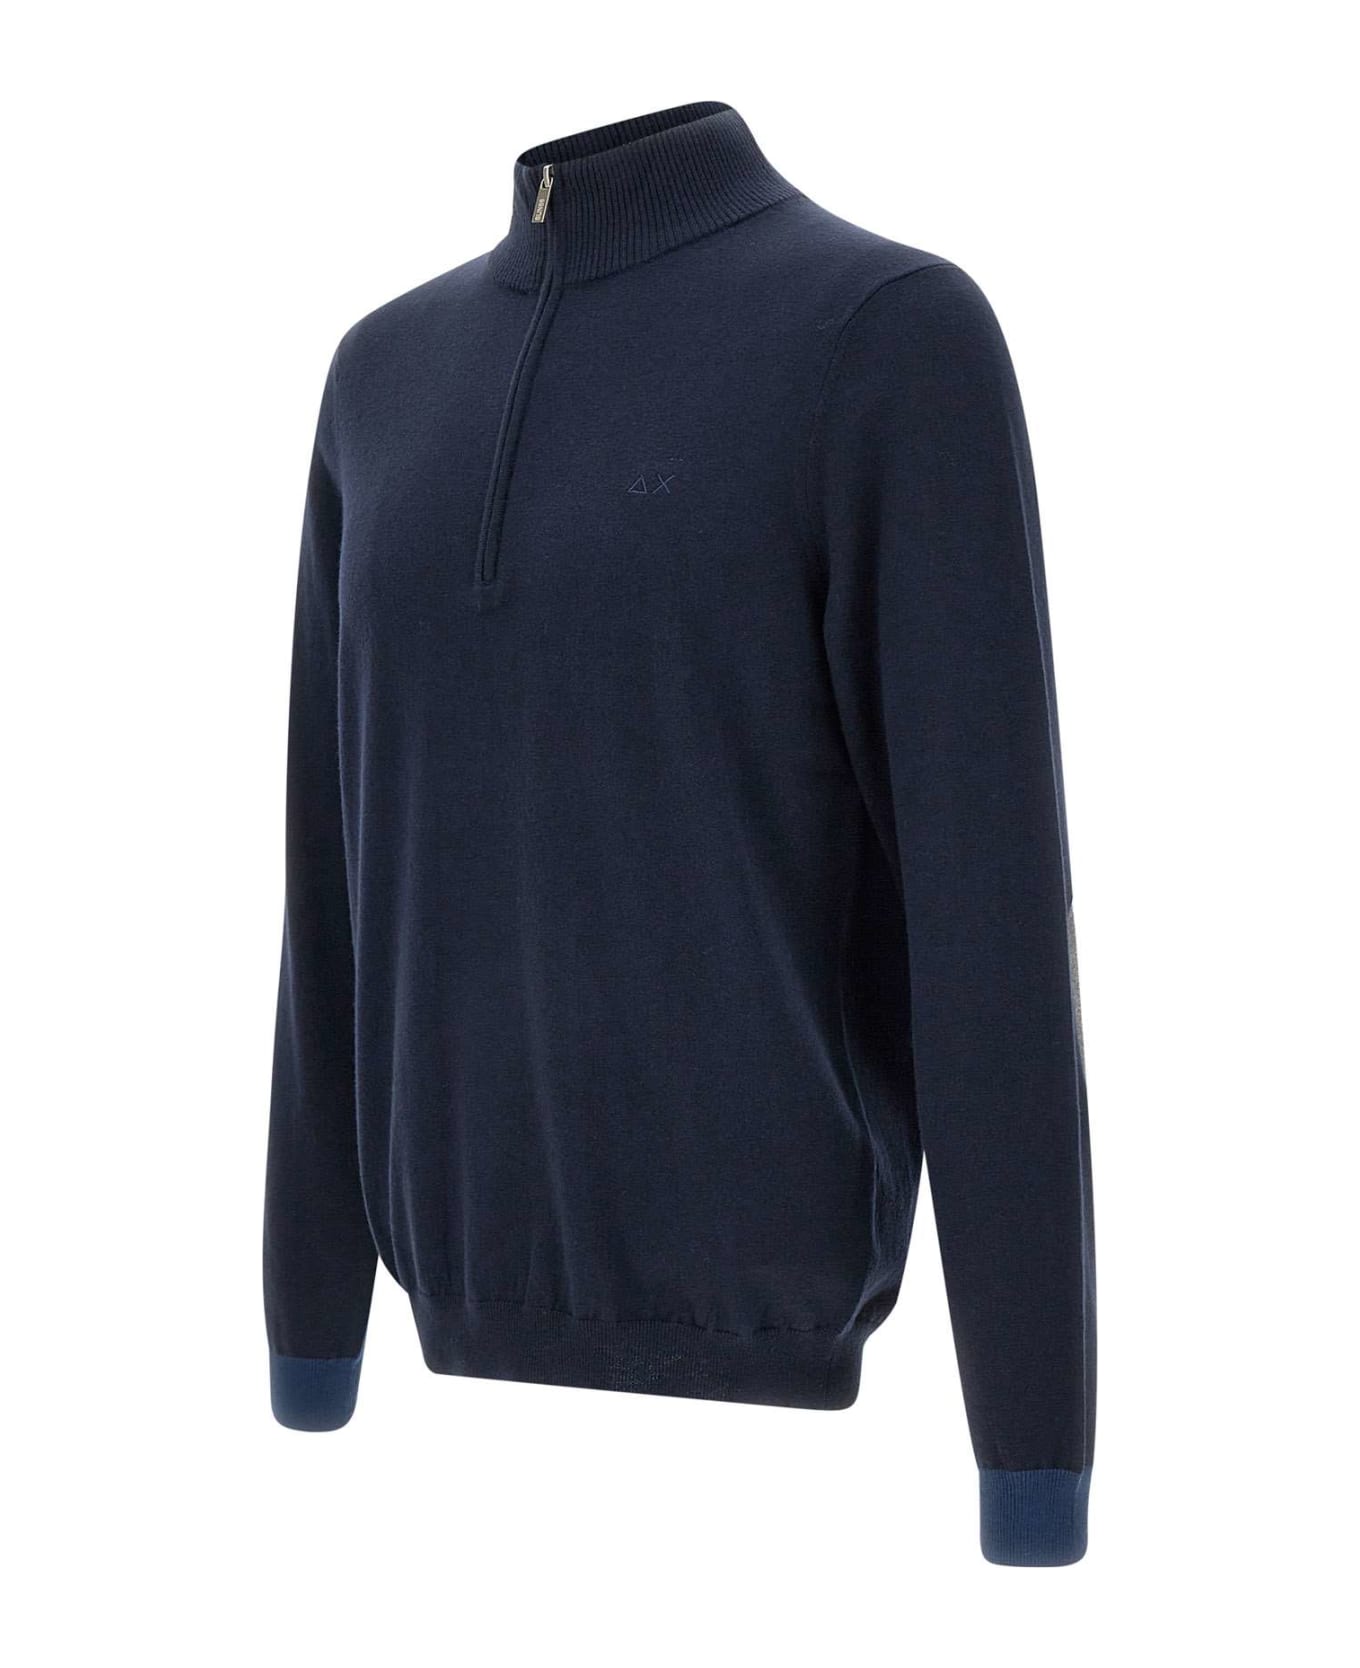 Sun 68 'stripes' Cotton And Wool Sweater Sweater - NAVY BLUE ニットウェア